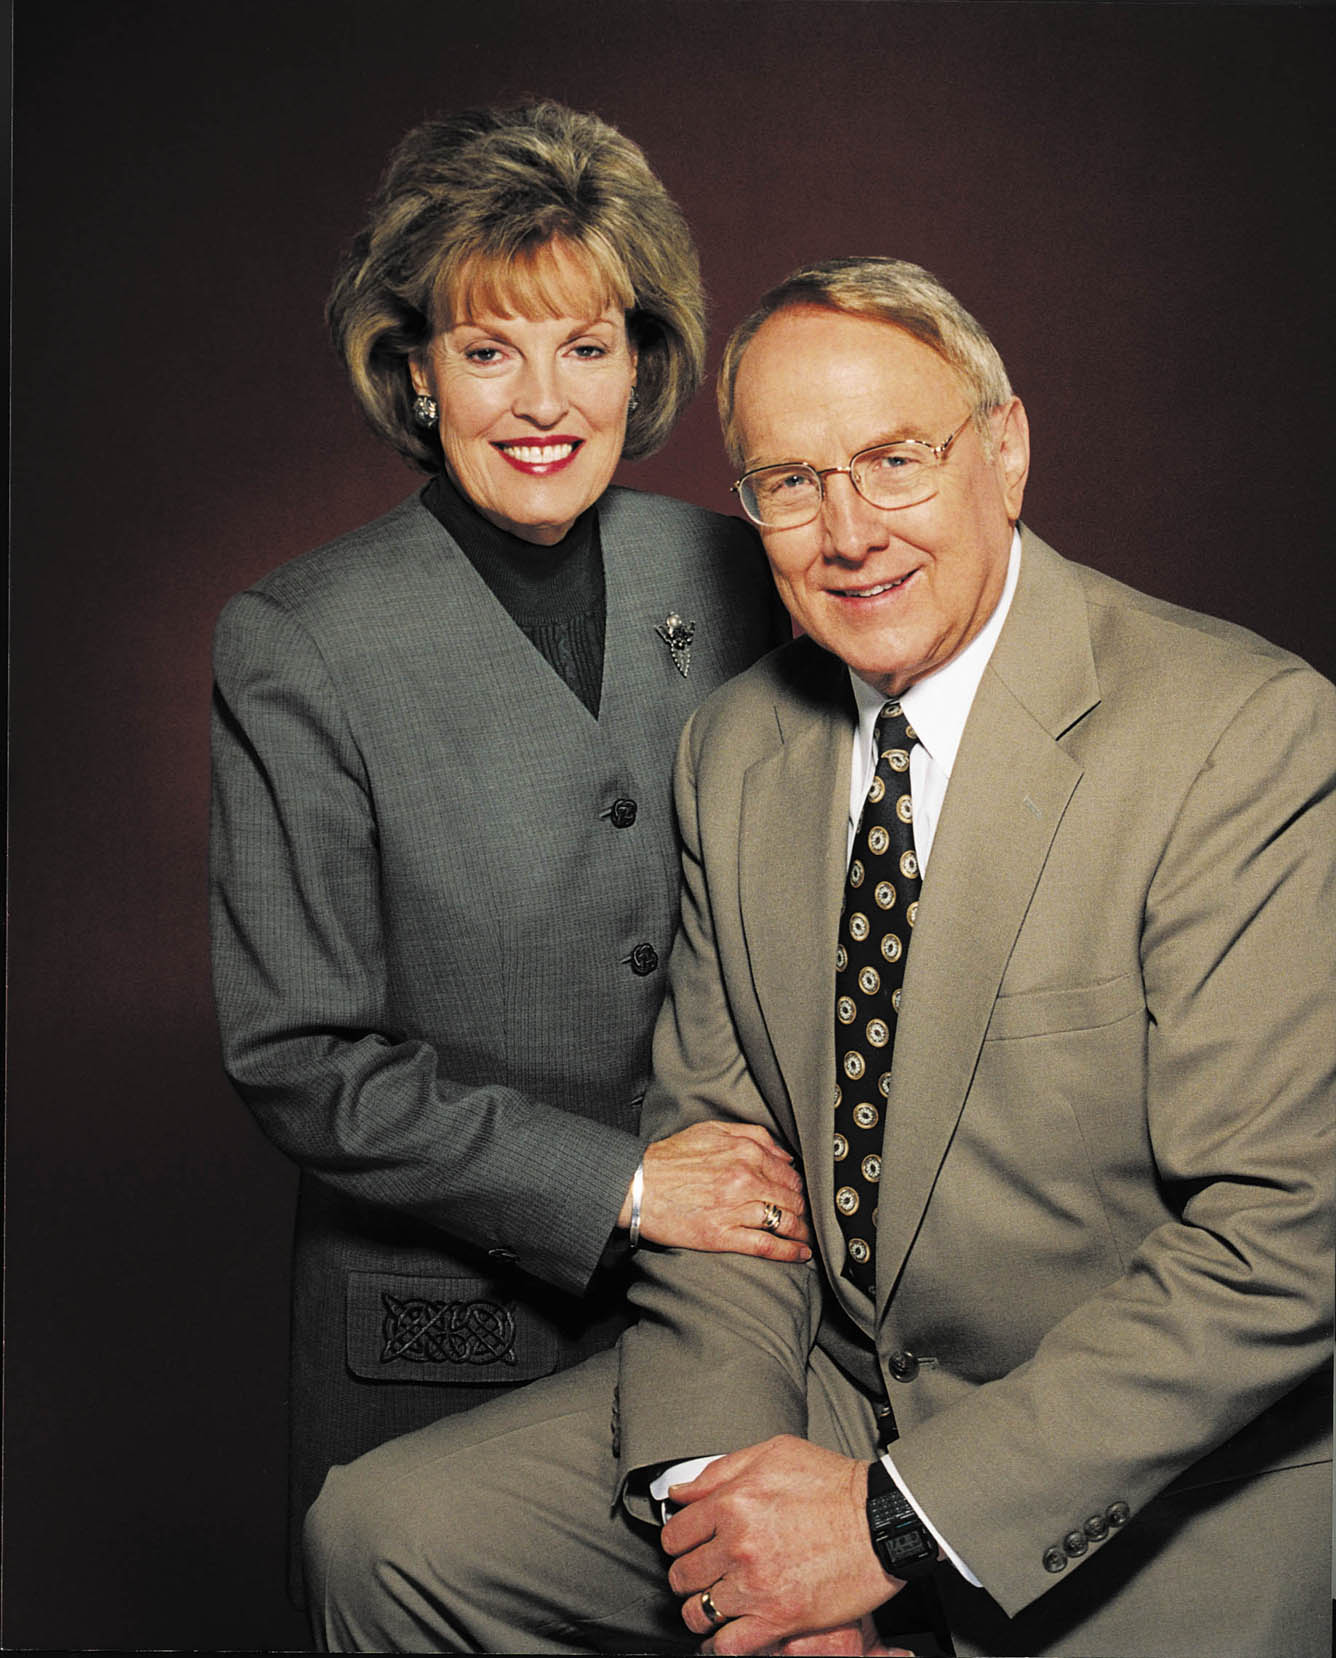 james dobson focus on the family movie reviews